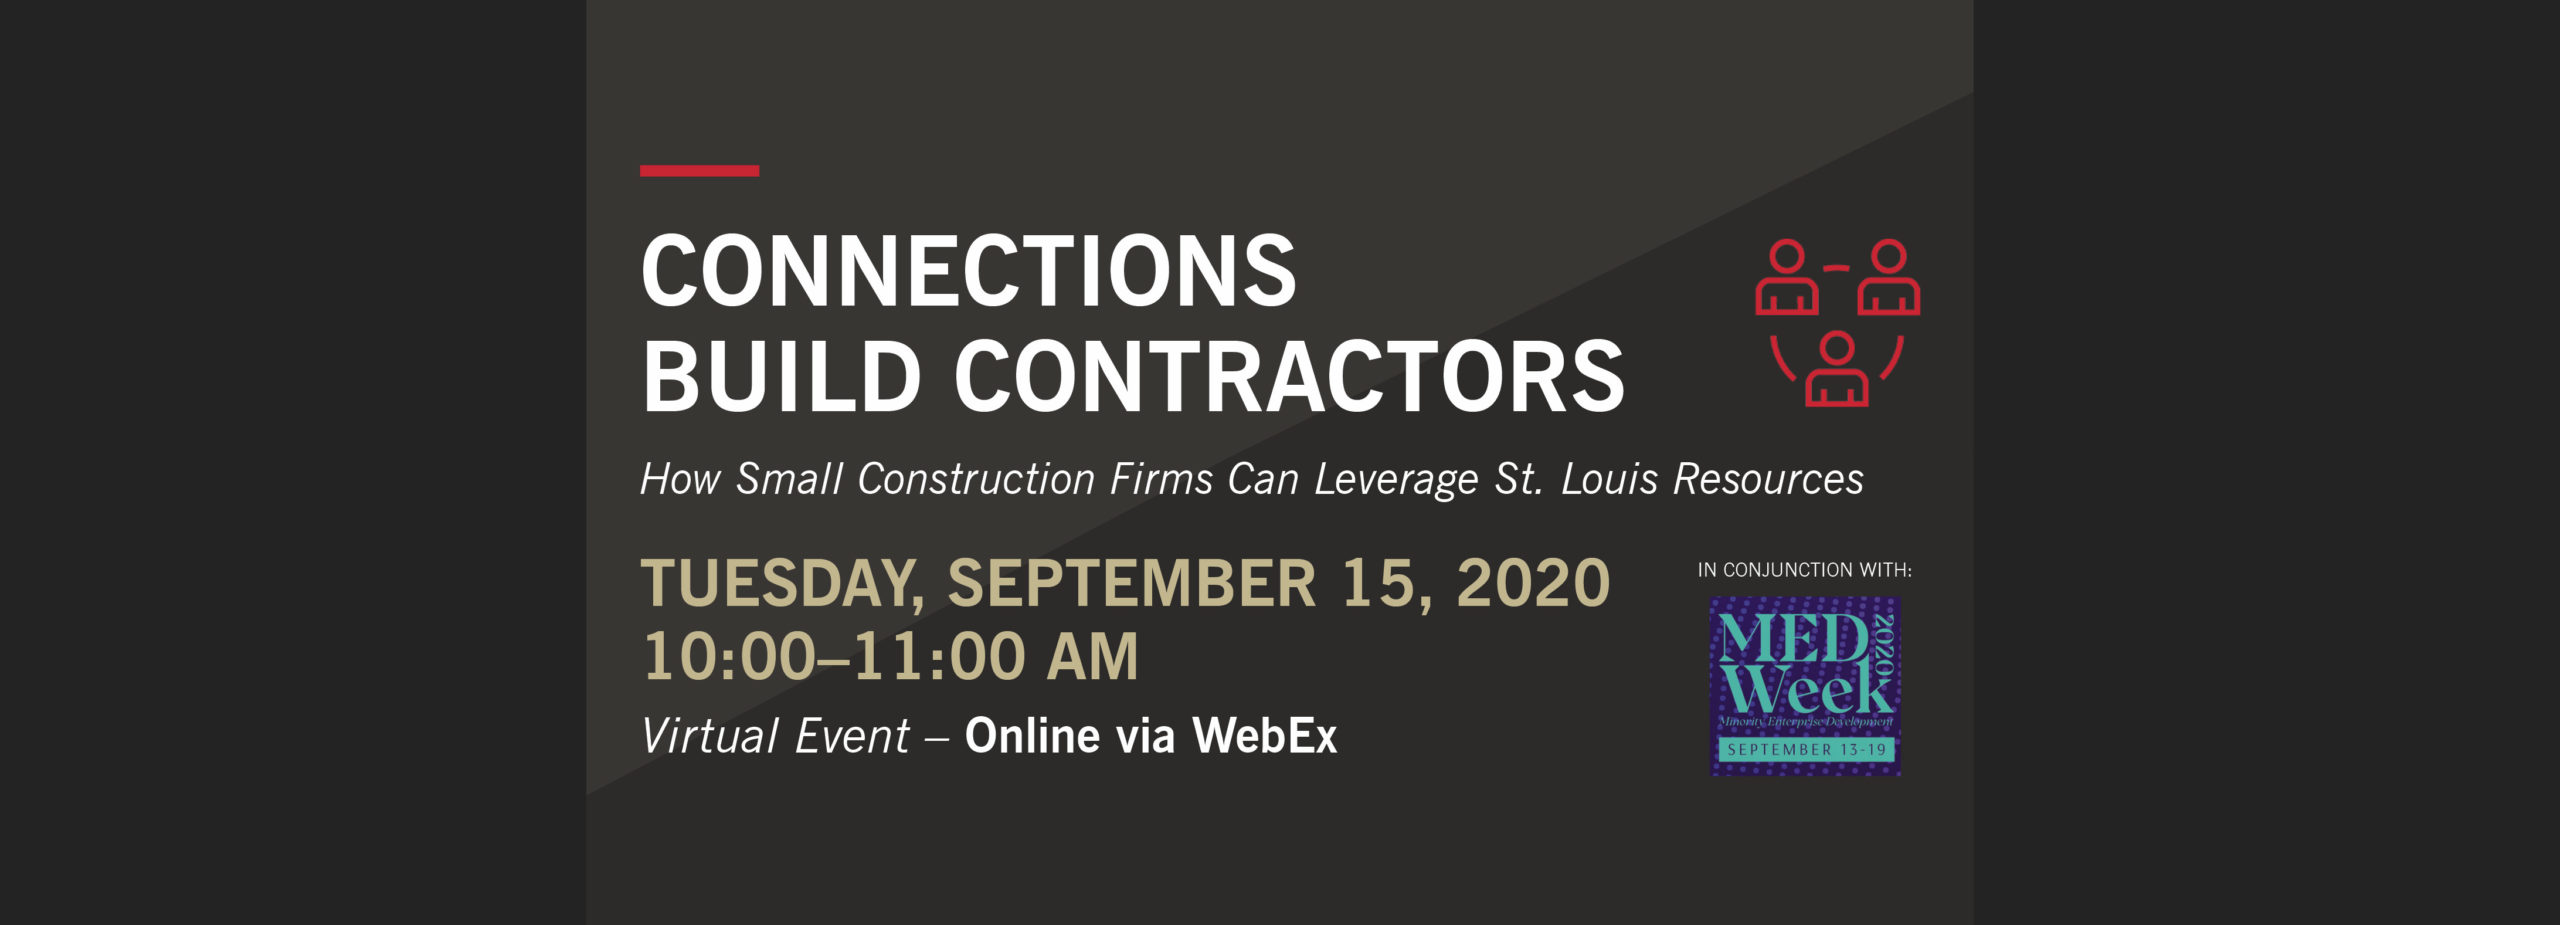 Connections Build Contractors: How Small Construction Firms Can Leverage STL Resources